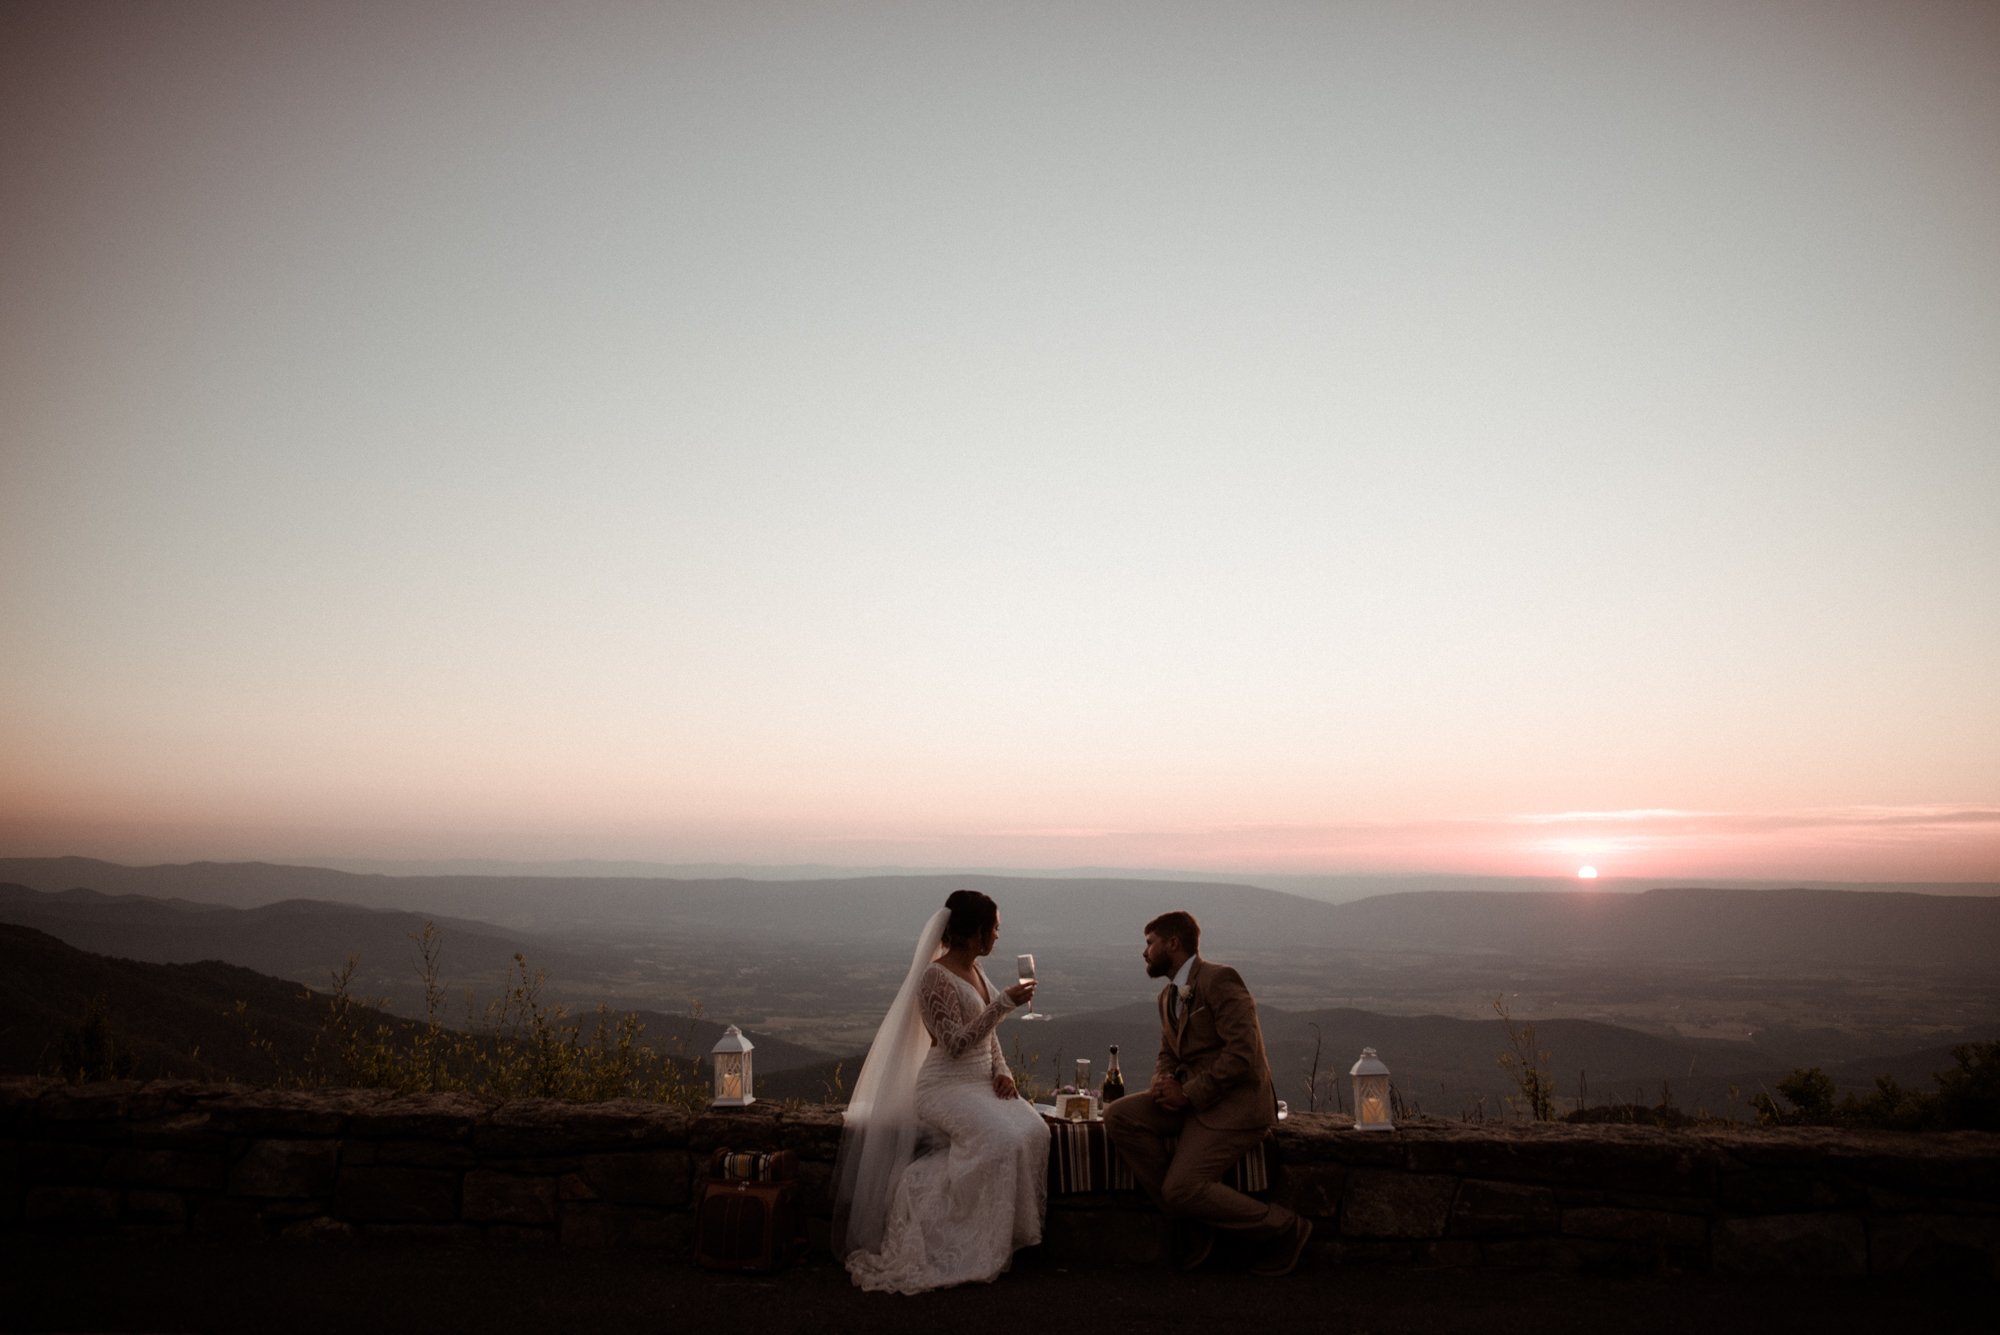 Sunset Elopement on Stony Man Summit in Shenandoah National Park - White Sails Creative Elopement Photography - July Elopement on the Blue Ridge Parkway_71.jpg